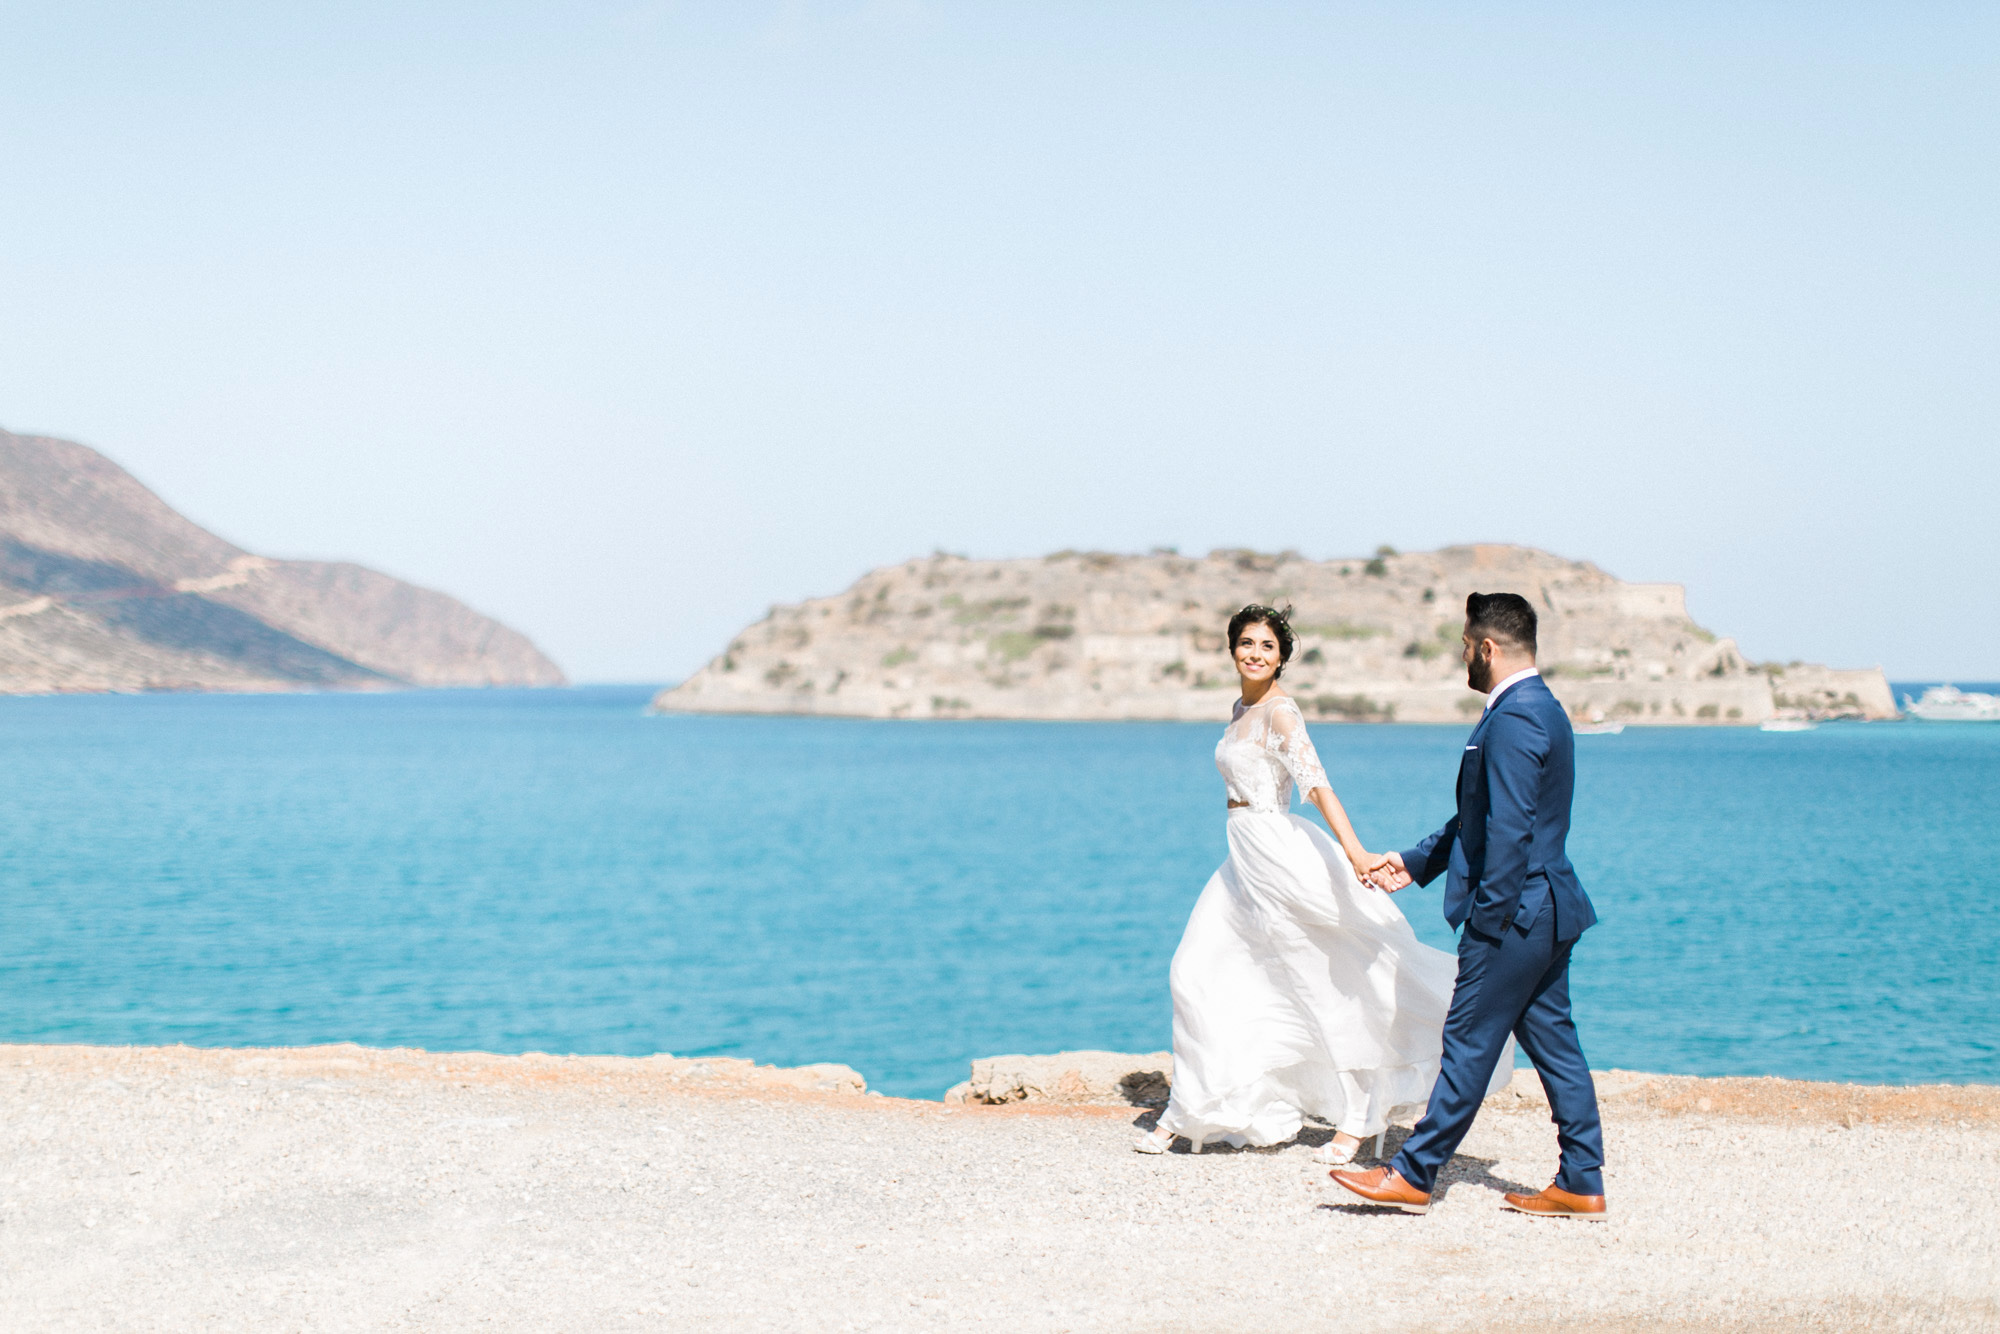 Professional wedding photosession in Elounda Crete, bride and groom walking and posing with Spinalonga island and sea view in the background.